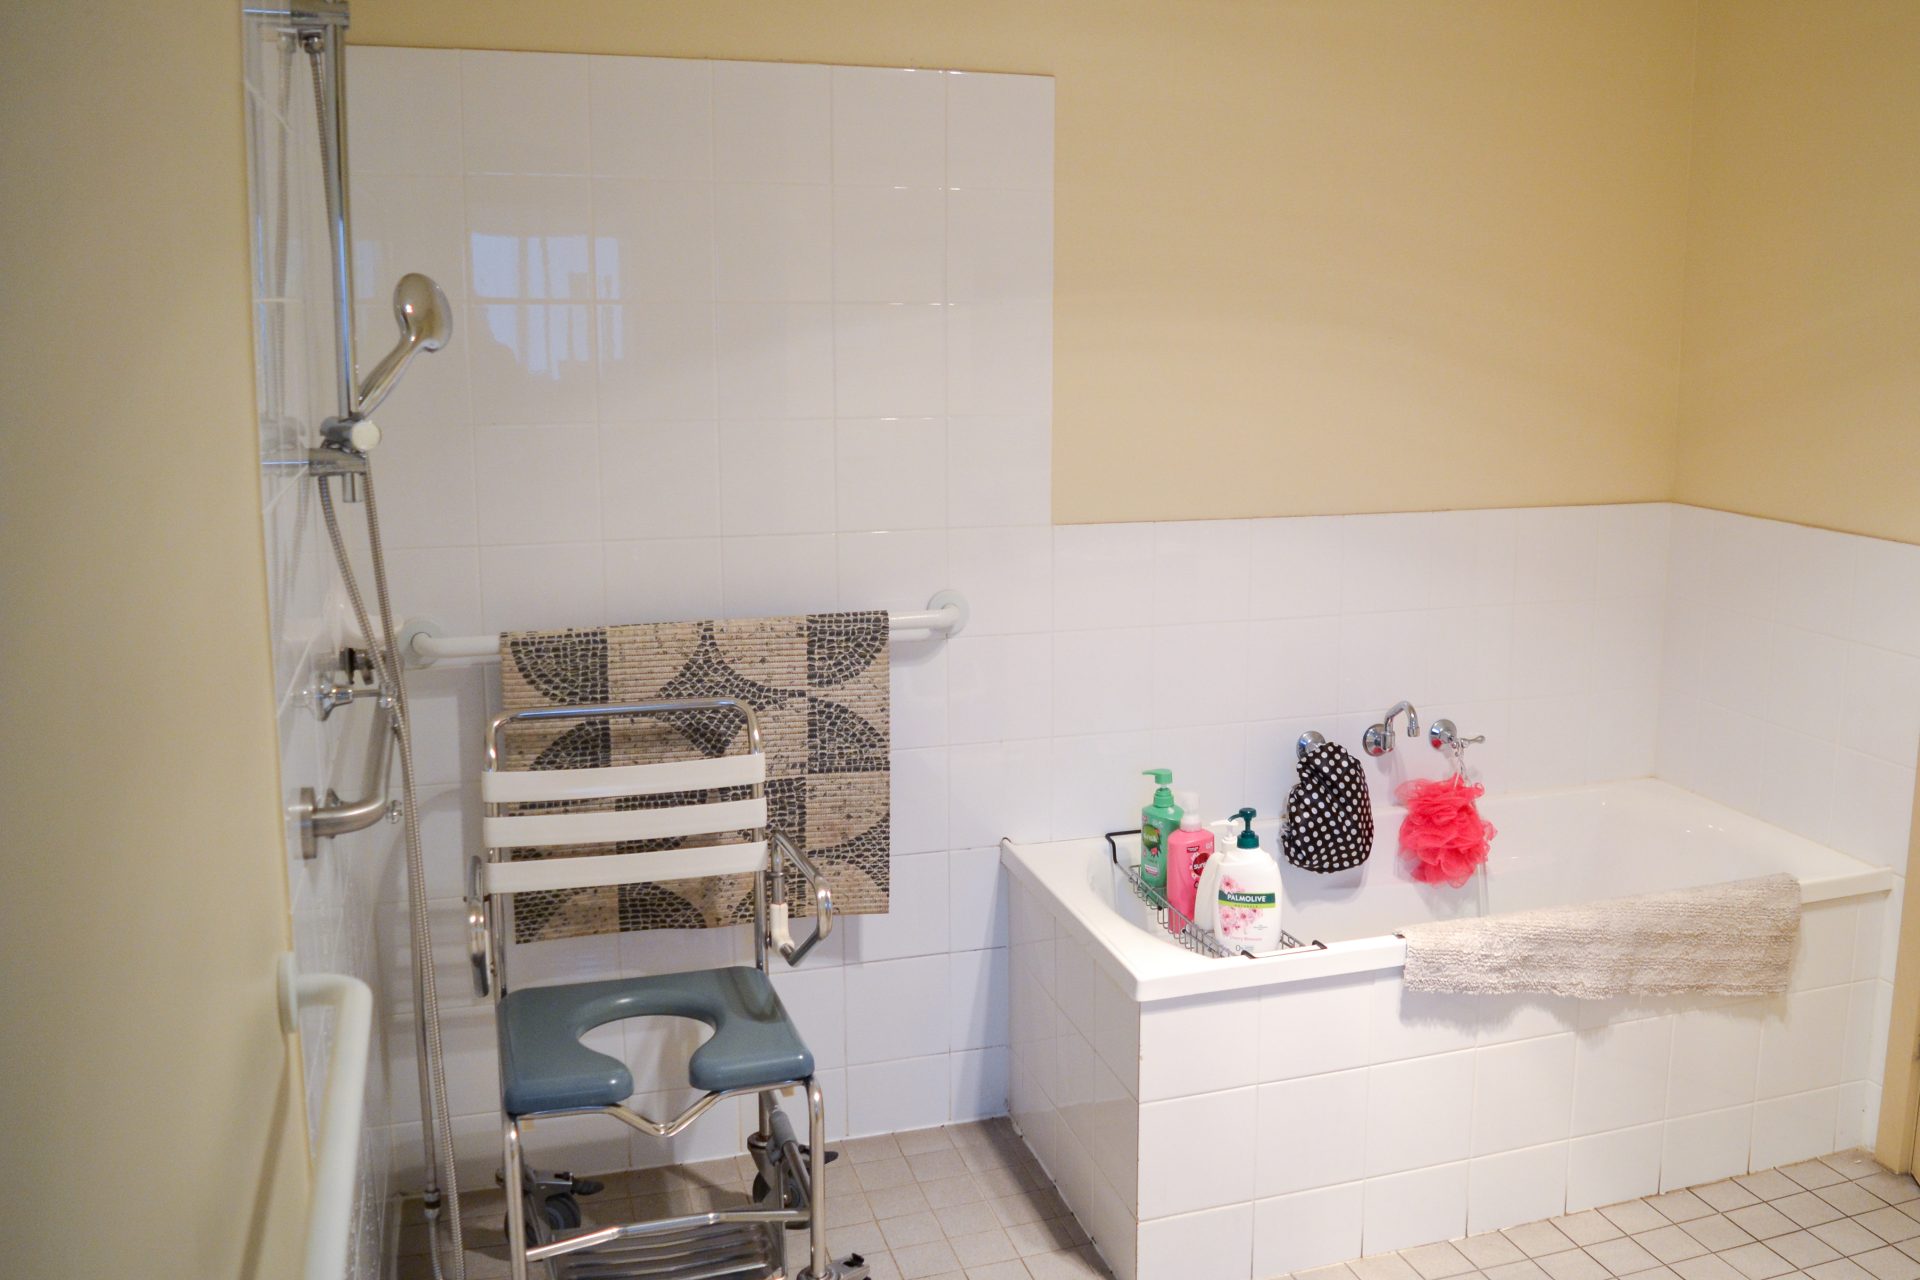 Bbathroom with yellow painted walls and white wall tiles in wet areas. 
Beige floor tiles with safety and shower rails scattered throughout. 